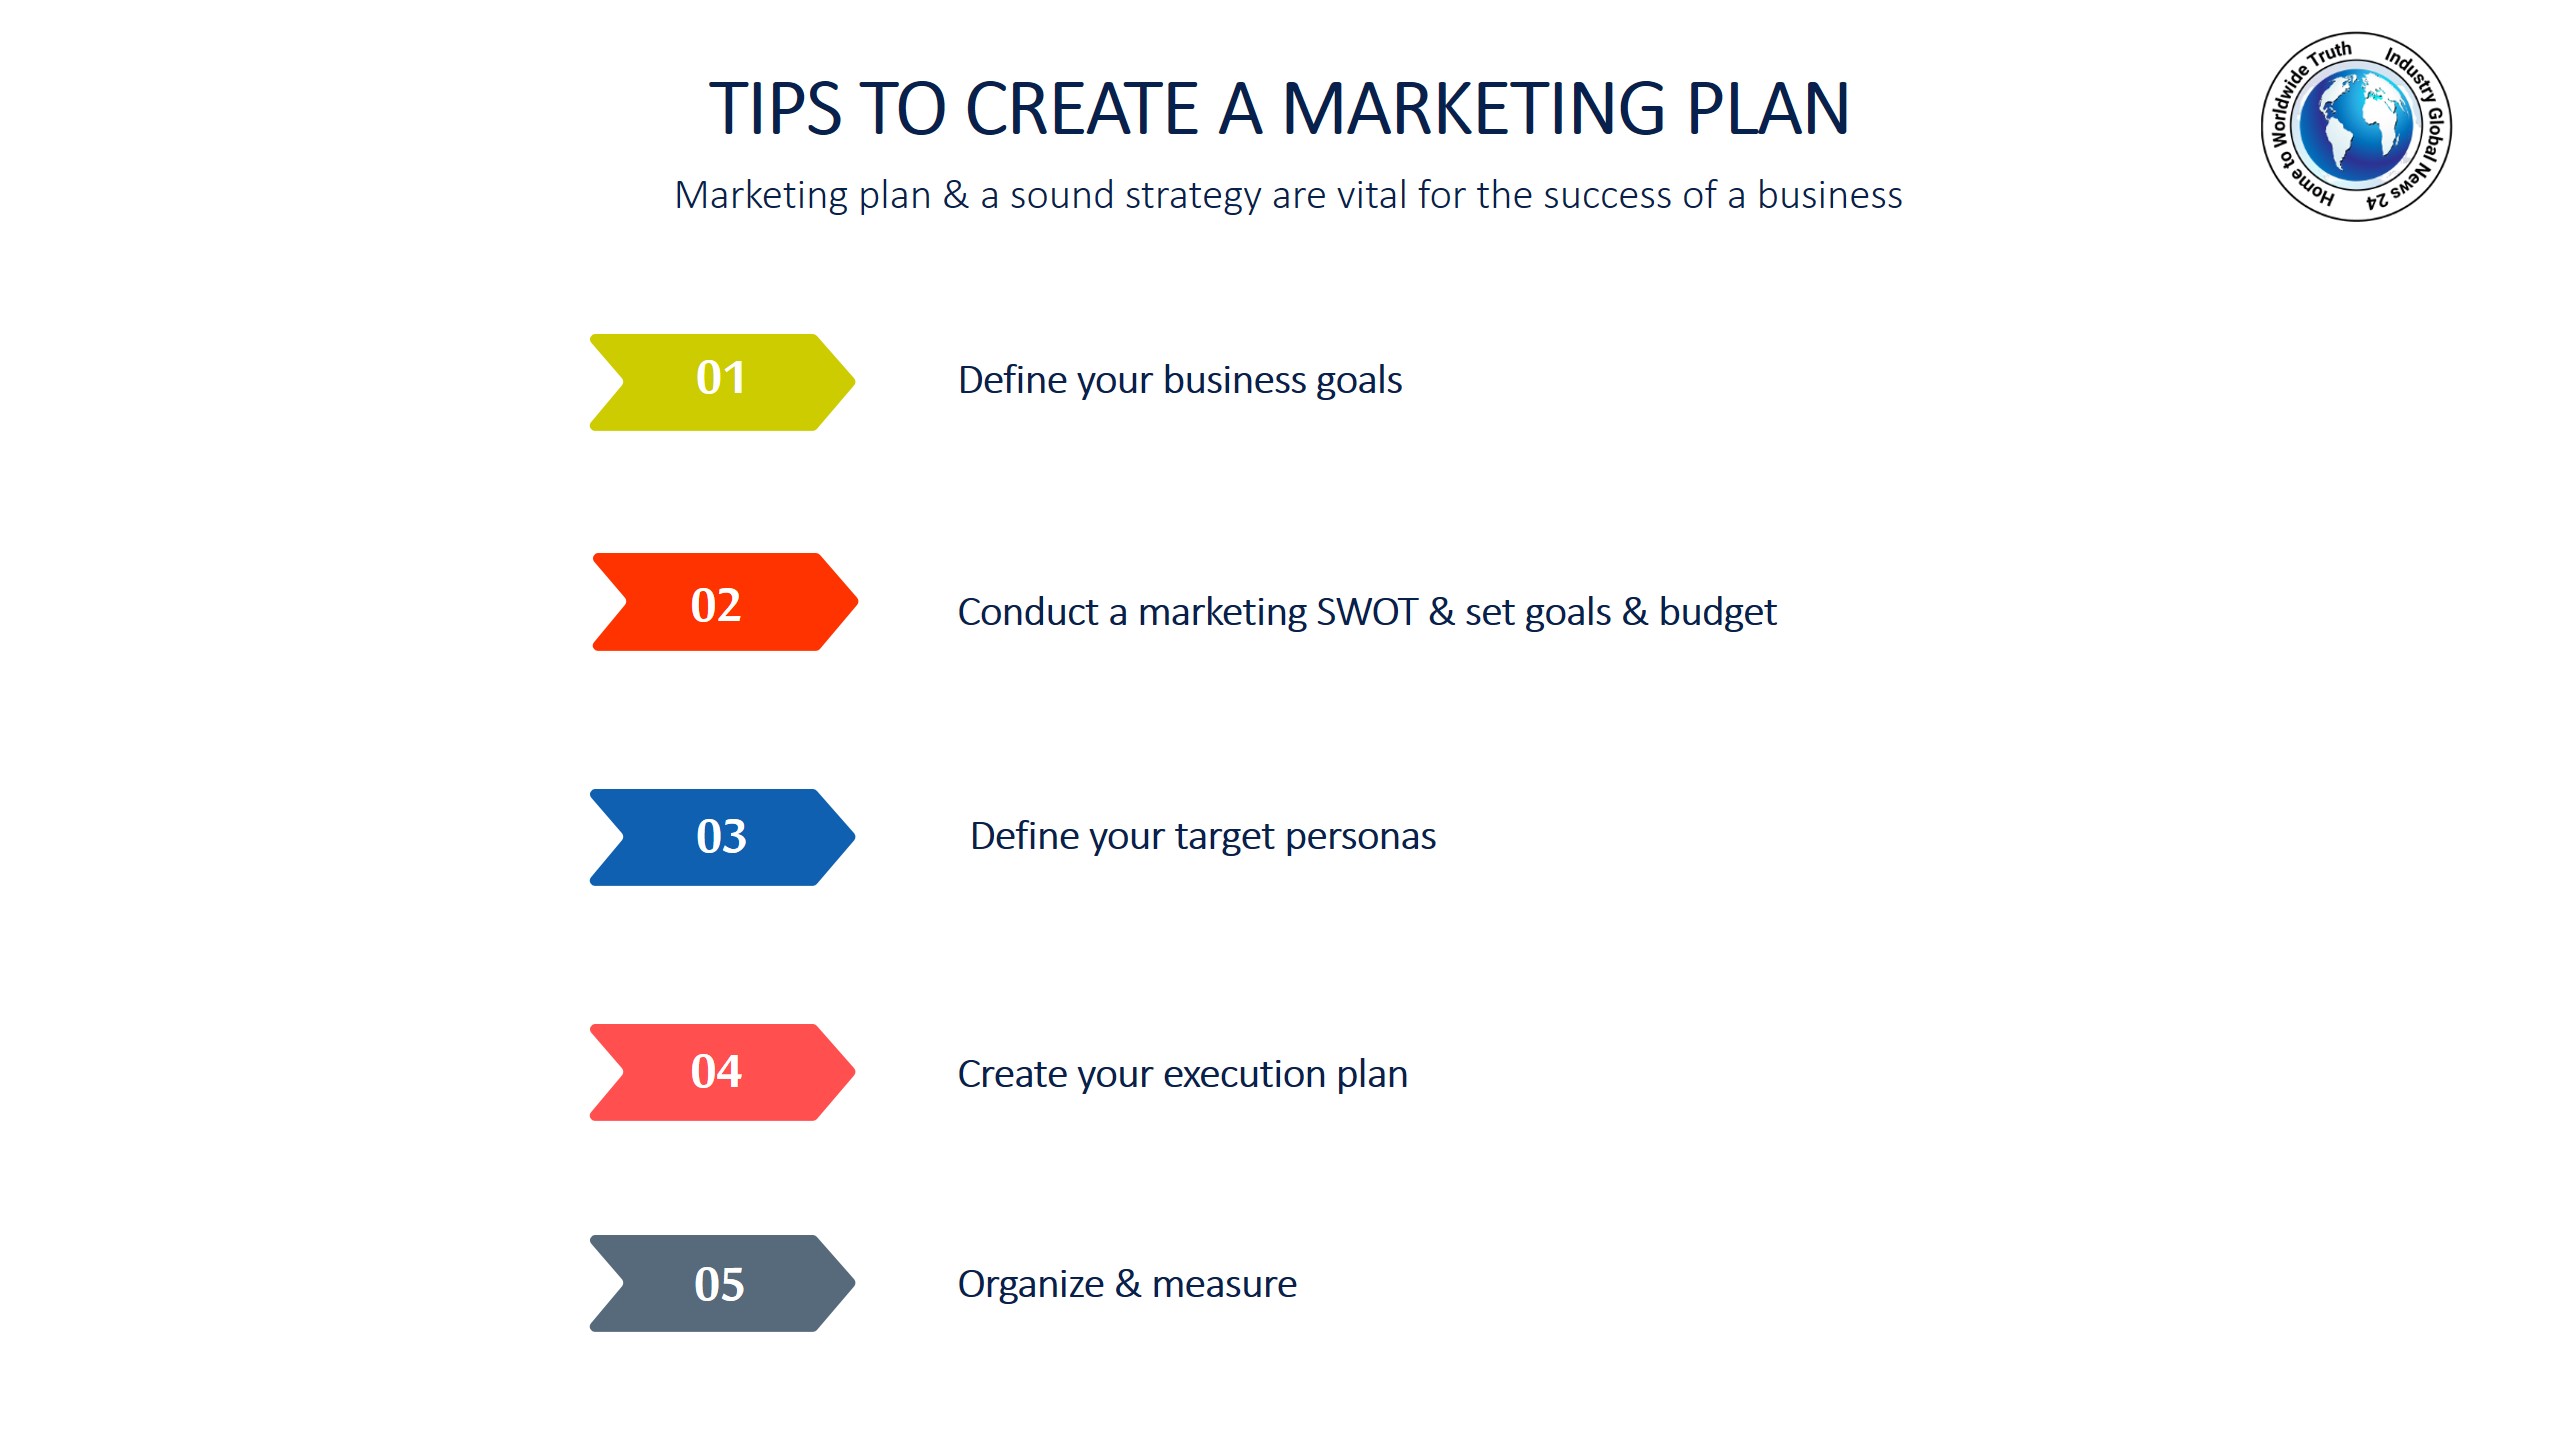 Tips to create a marketing plan